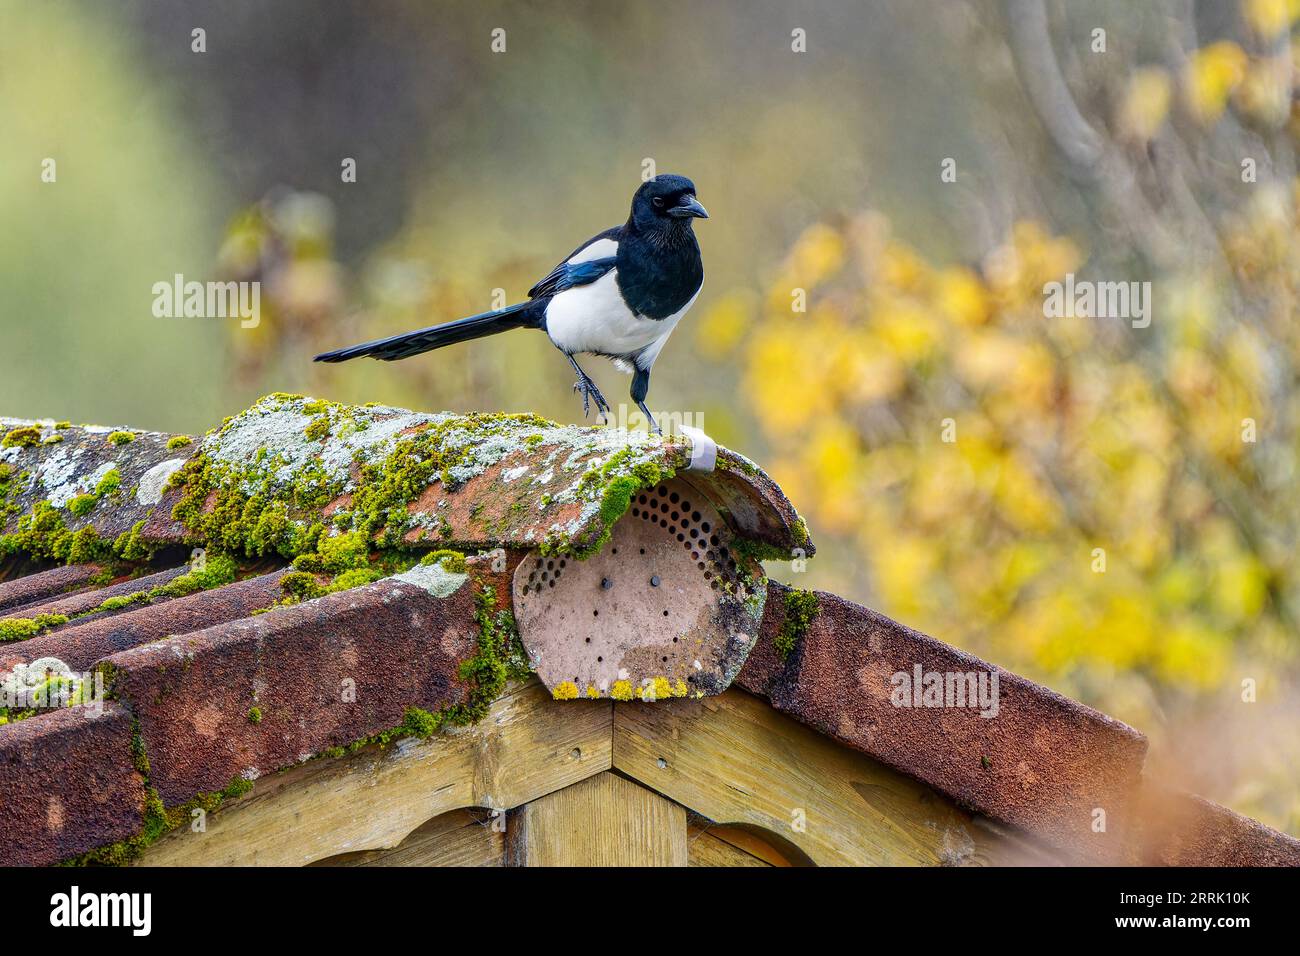 The magpie (Pica pica) is a species of bird in the corvid family. It inhabits large parts of Europe and Asia as well as northern North Africa, Sonthofen, Germany Stock Photo